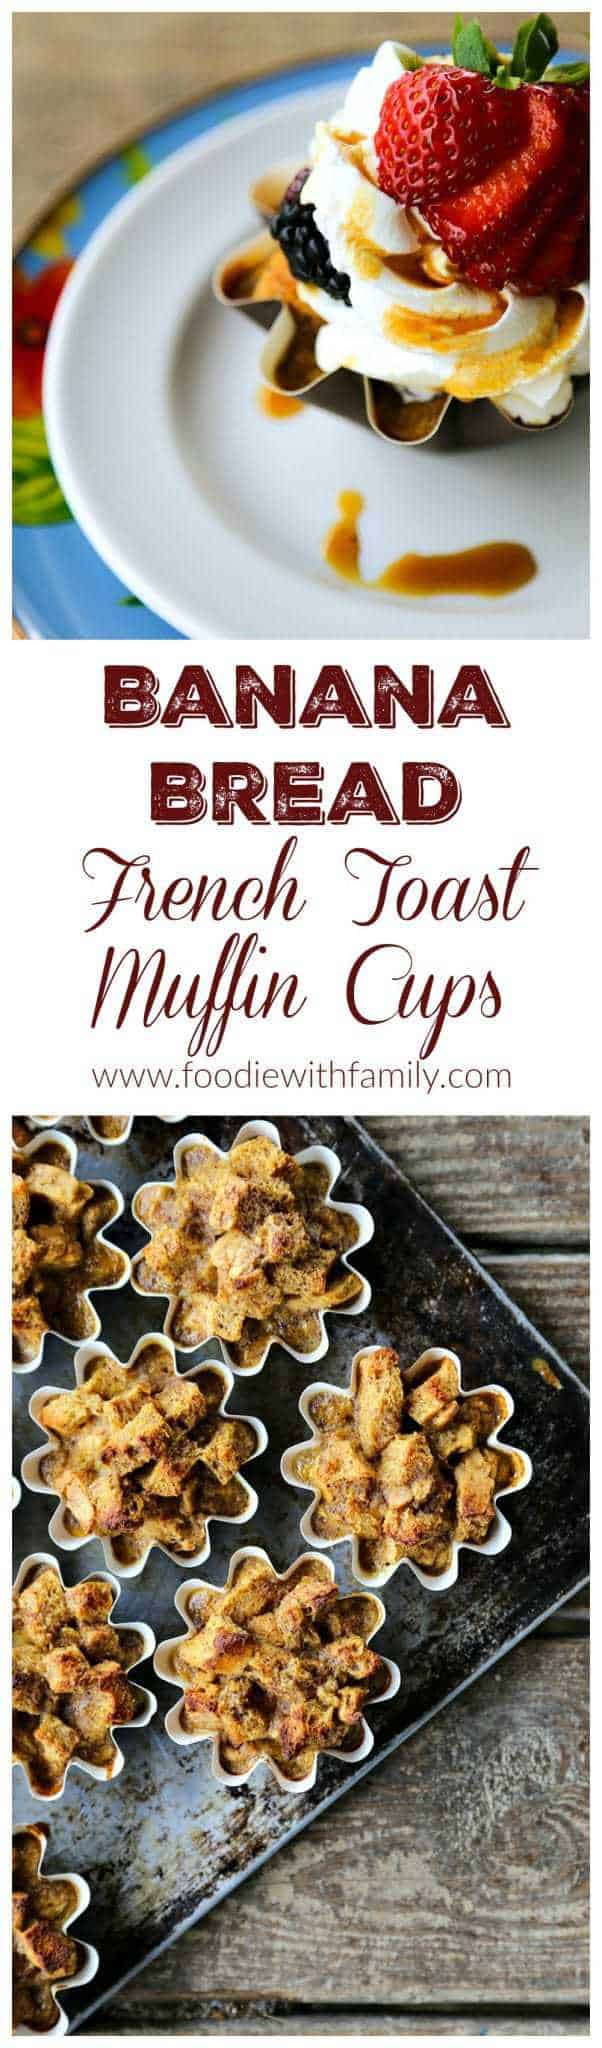 Banana Bread French Toast Muffin Cups for an easy, delicious breakfast... Or dessert ;) foodiewithfamily.com